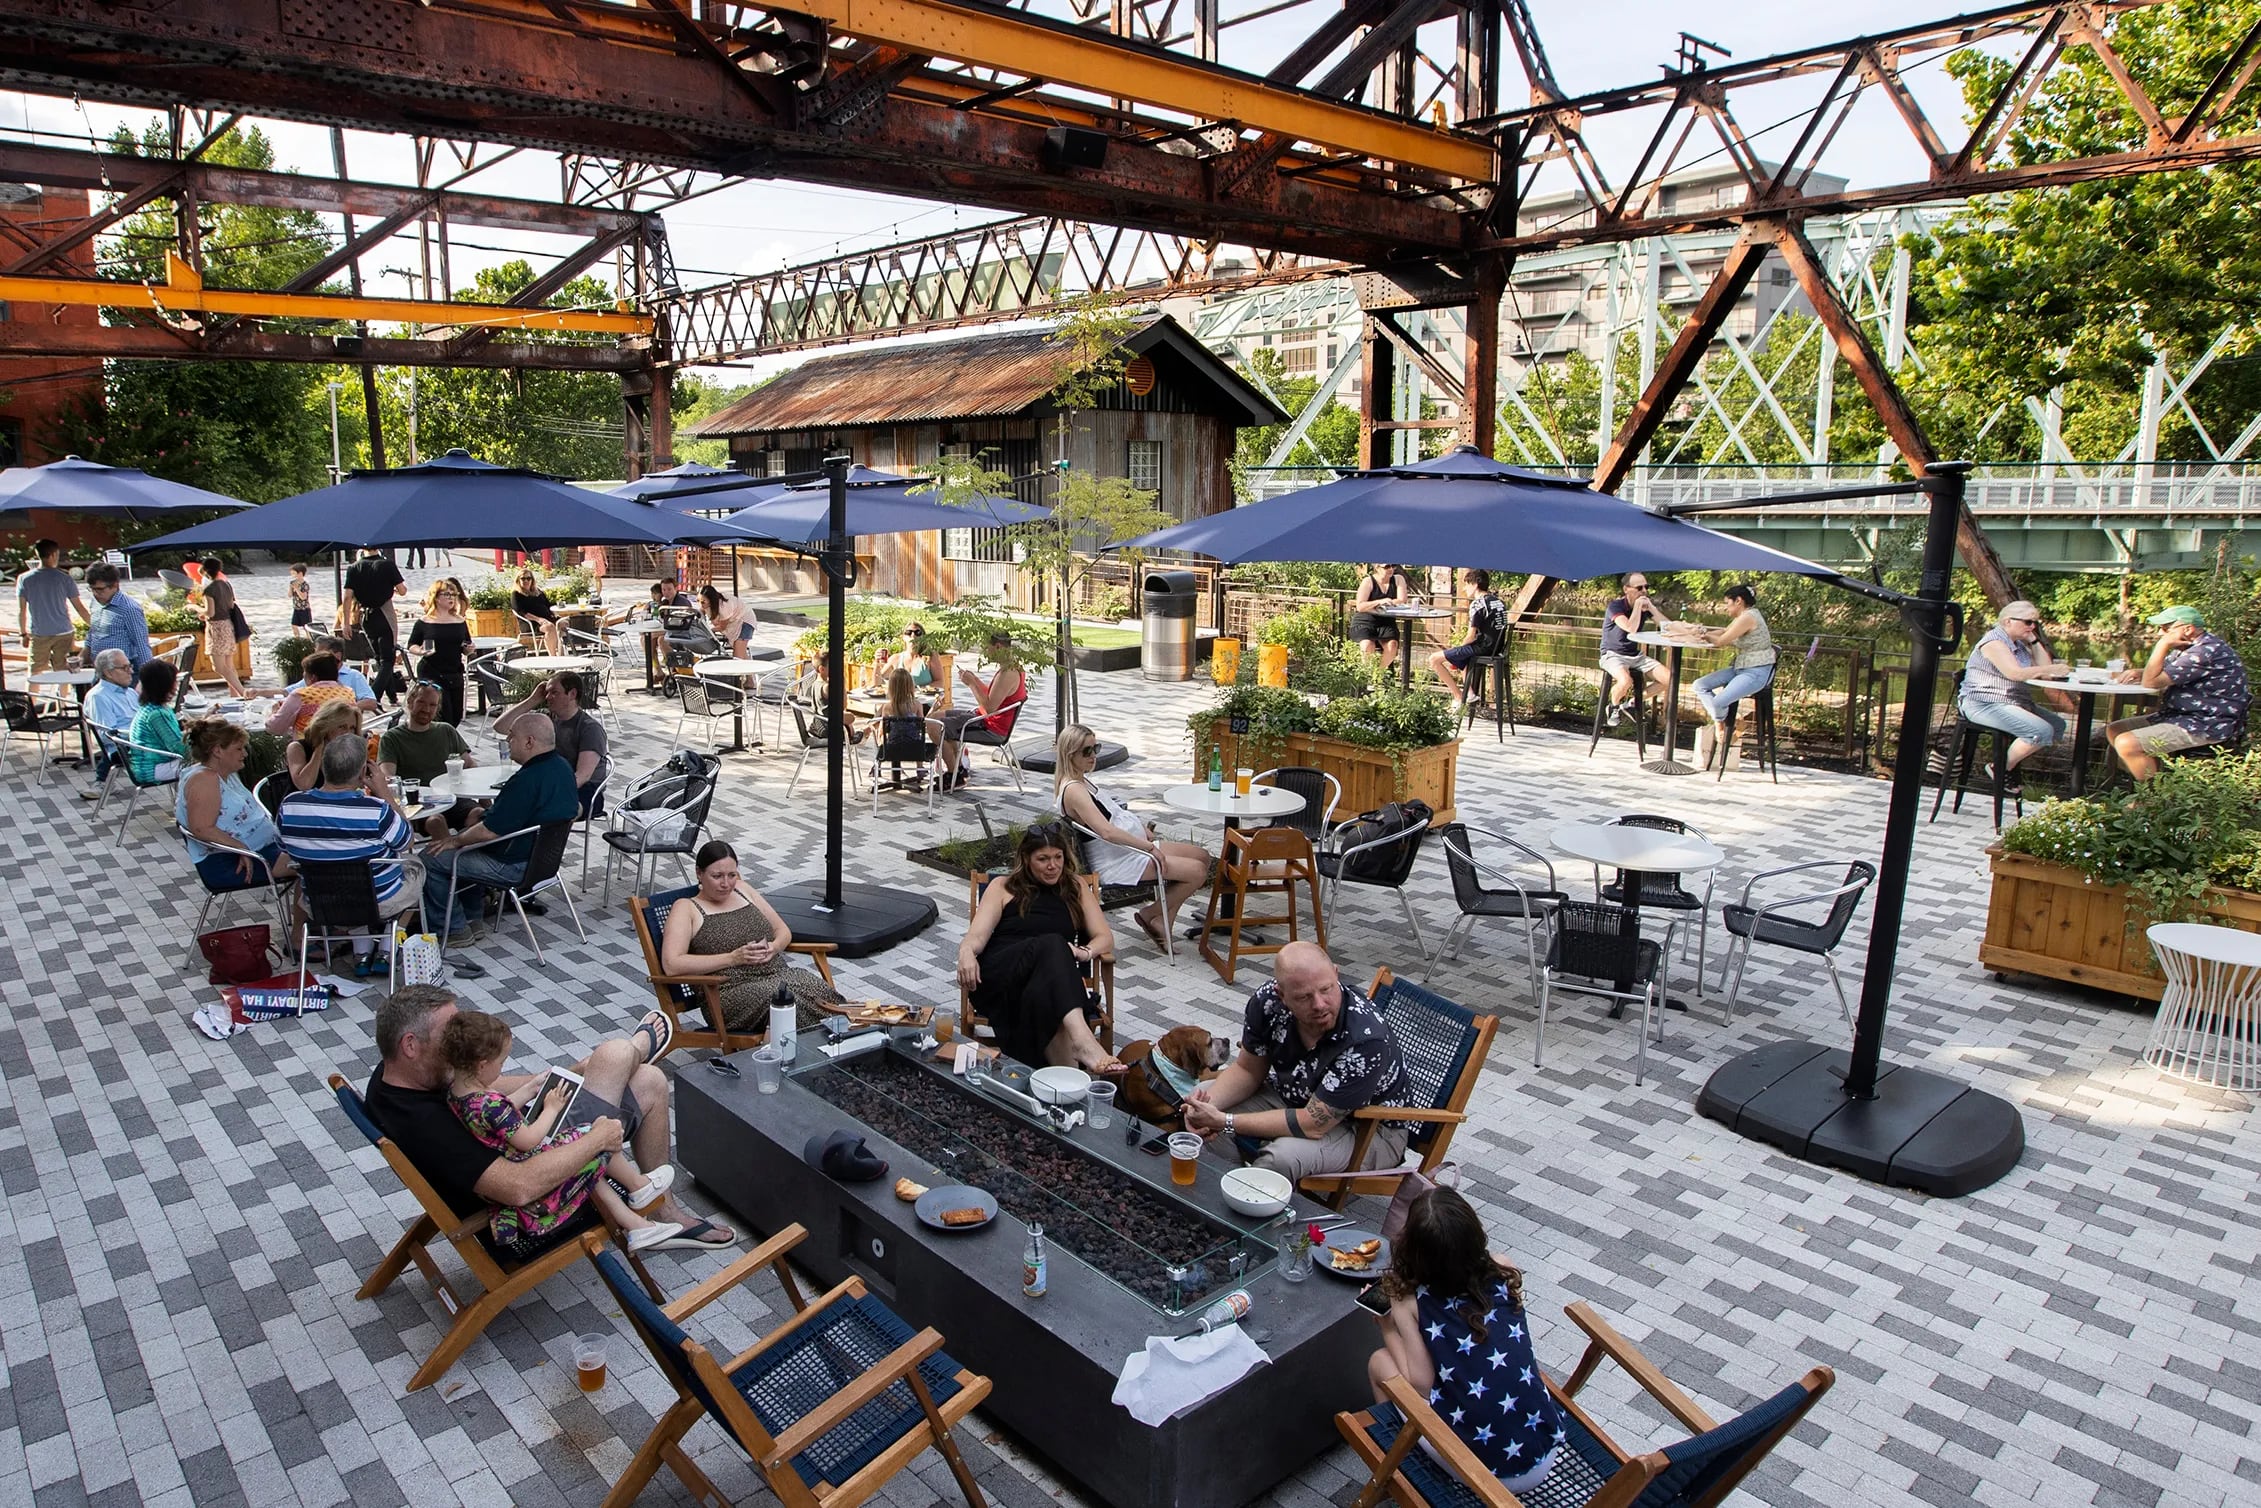 The Landing Kitchen, an all-day cafe created by Nicholas Elmi and Fia Berisha at the riverside redevelopment of the Pencoyd Ironworks.,on July 10, 2021.